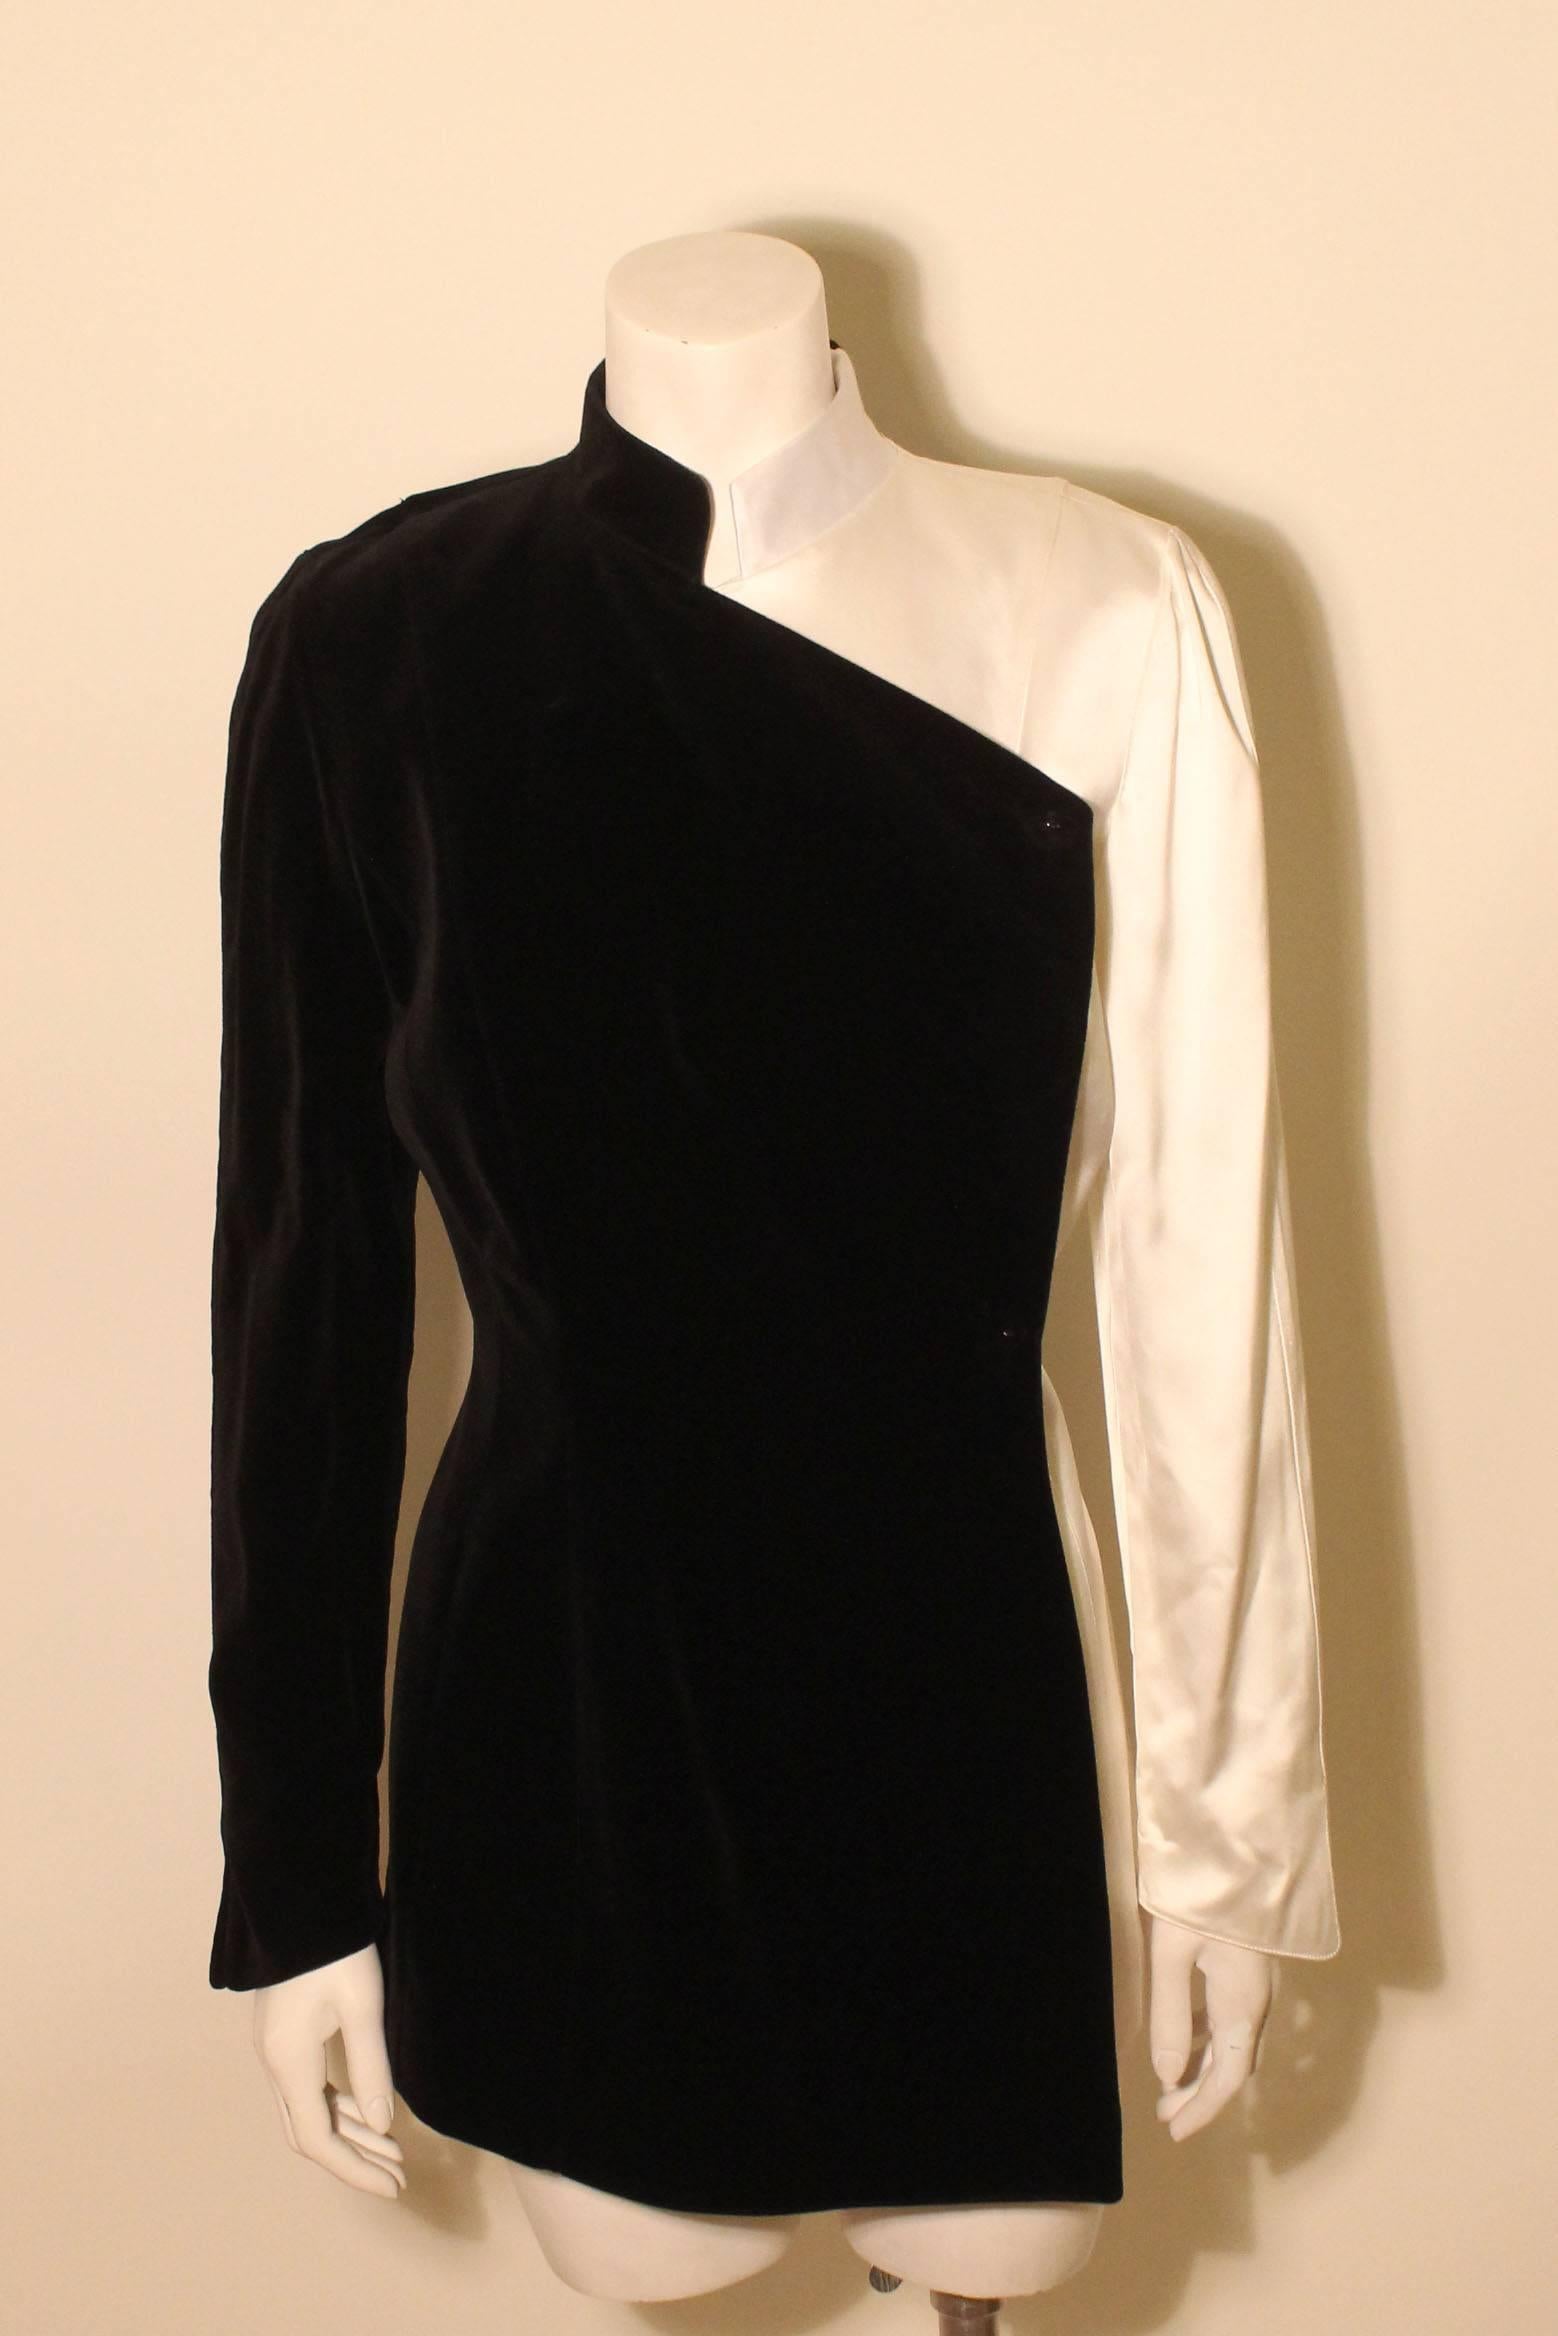 This half white satin, half black velvet Mugler jacket is a knockout. It hugs the body beautifully & the combination of the two fabrics is executed in a flawless, almost architectural design. The shoulders are strong but not exaggerated in an